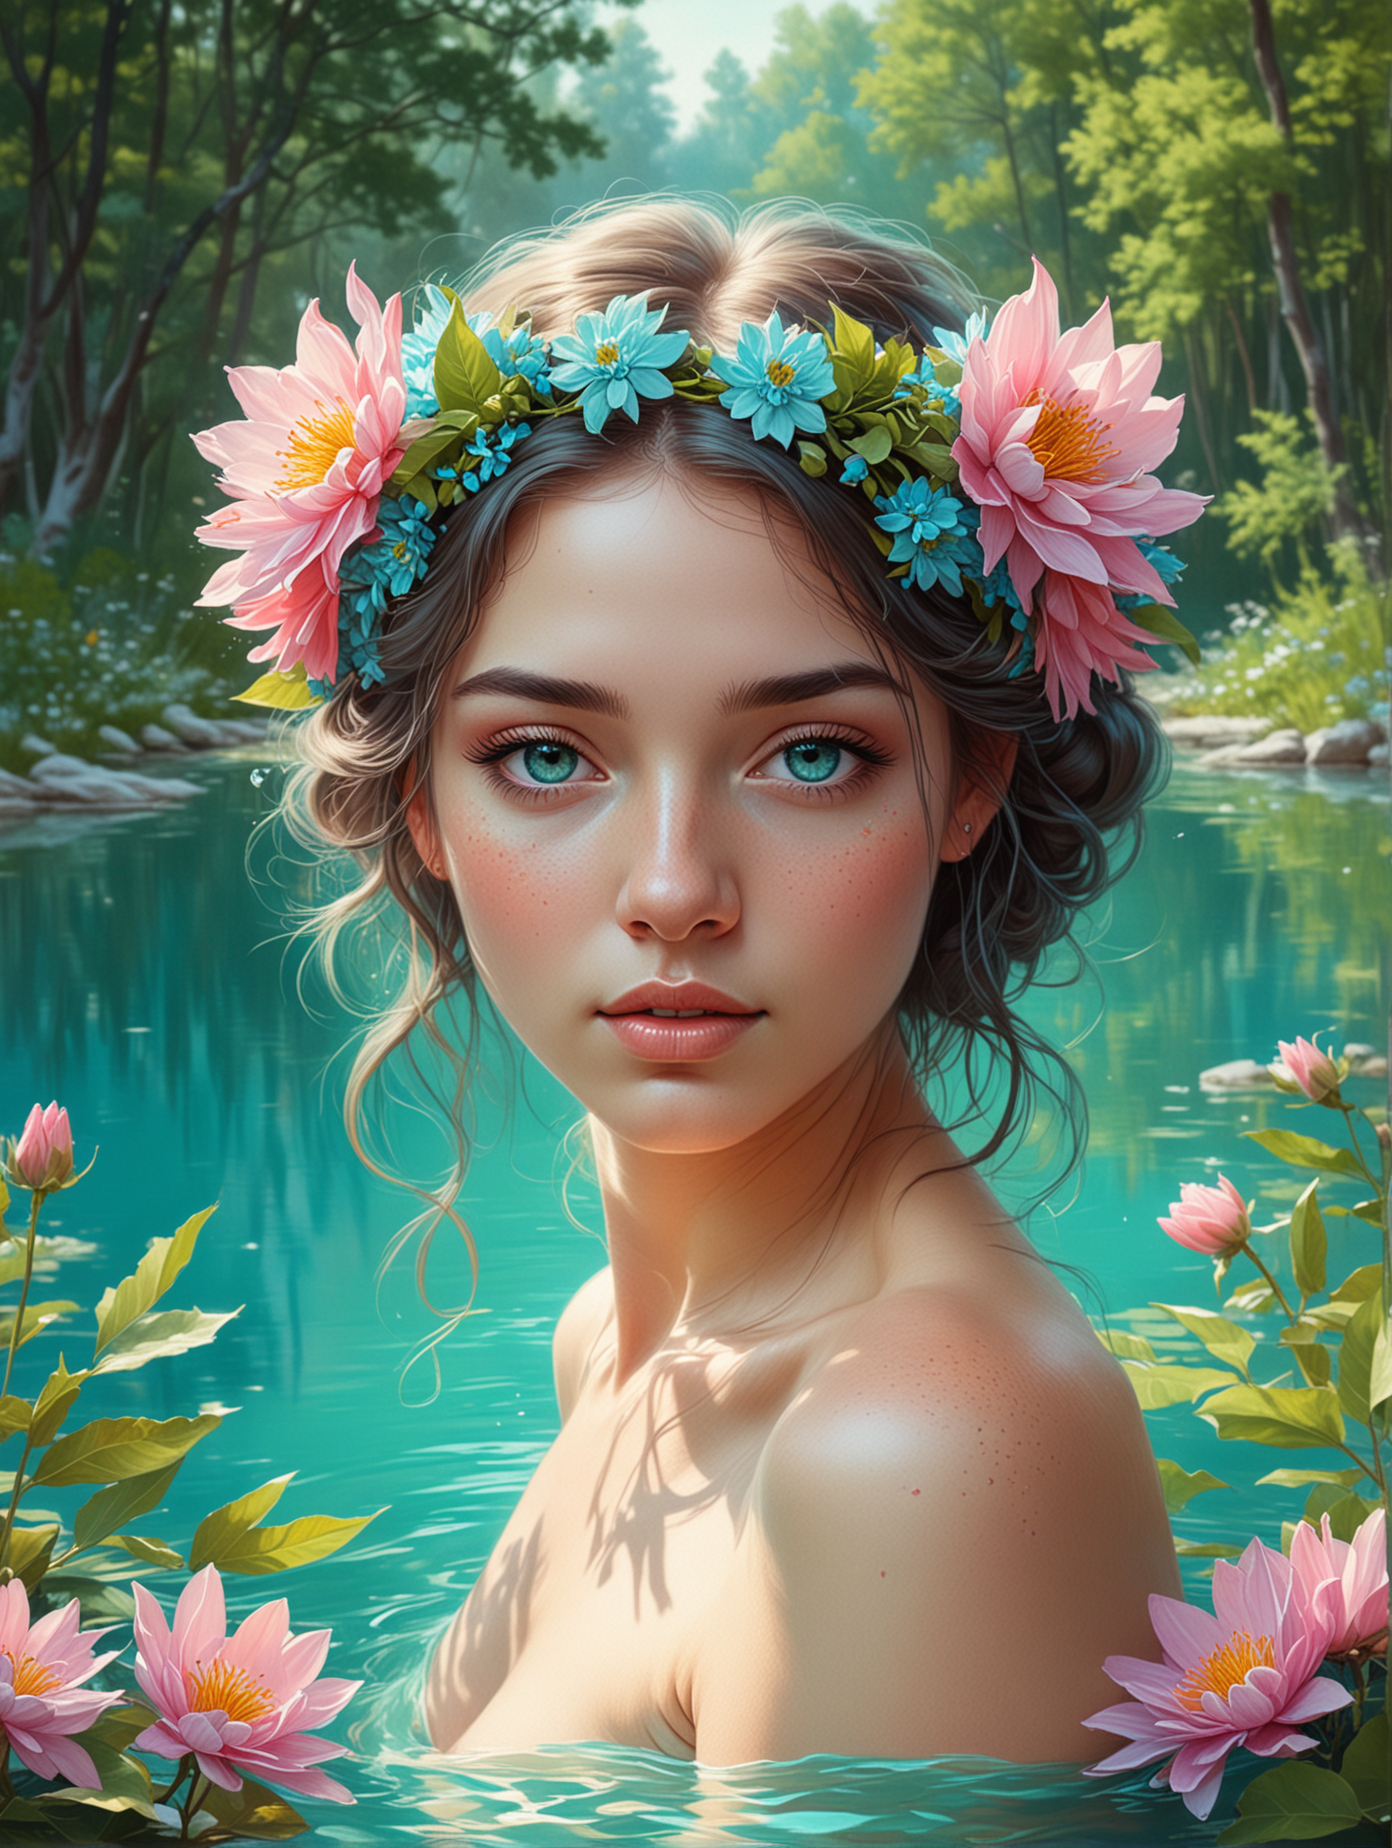 Enchanting Nymph by the Azure Lake Amidst Blossoming Trees Portrait Illustration